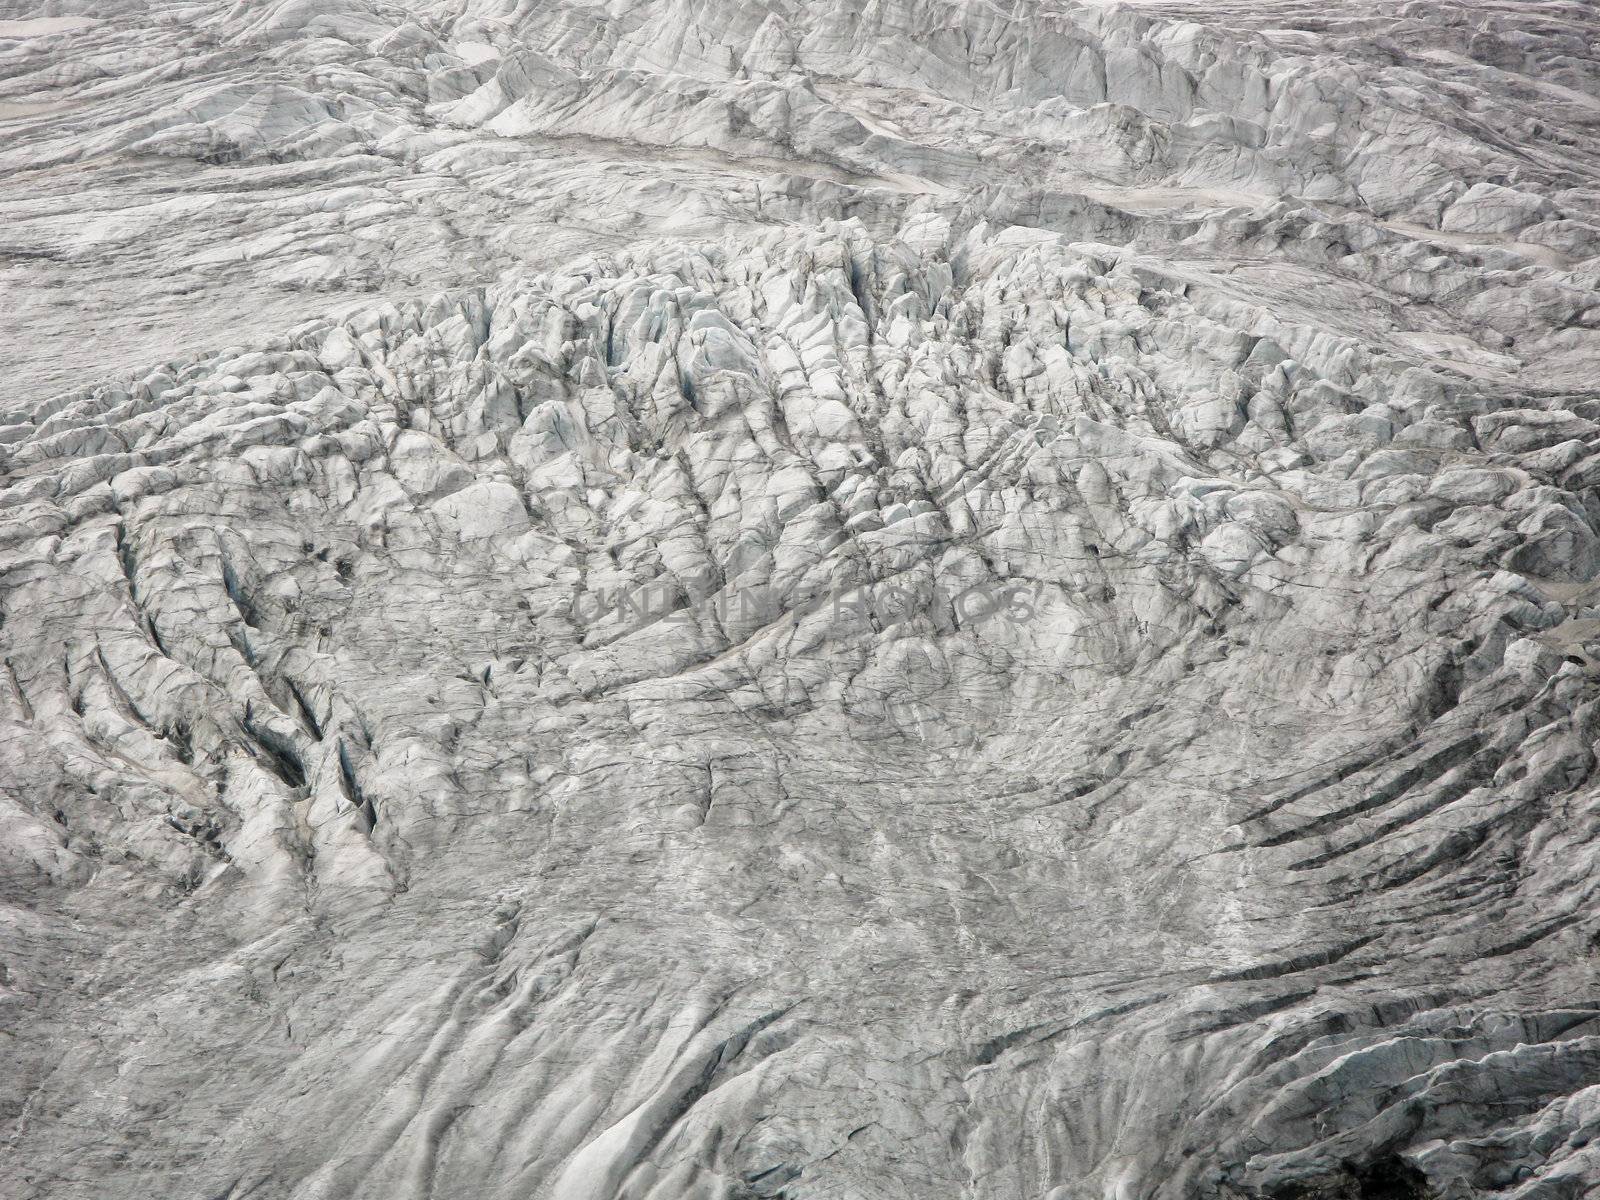 detail of a glacier, ice field, surface